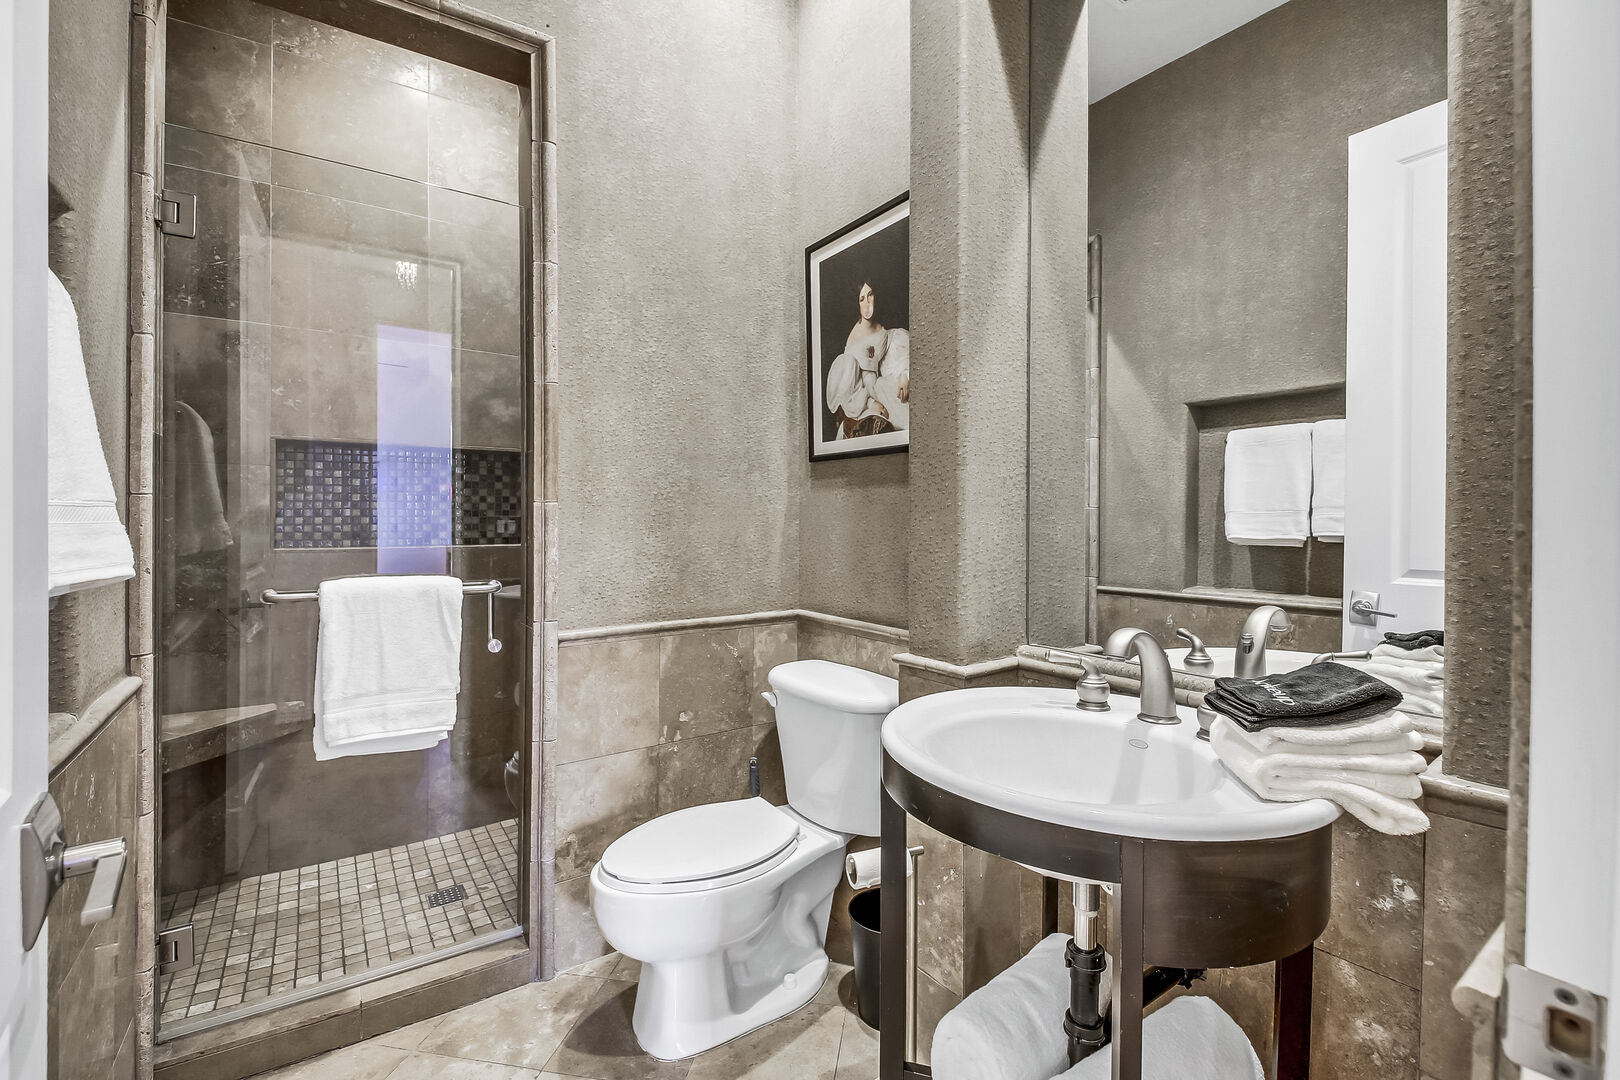 The hallway bathroom is located near the front door and features a tile shower and pedestal sink.